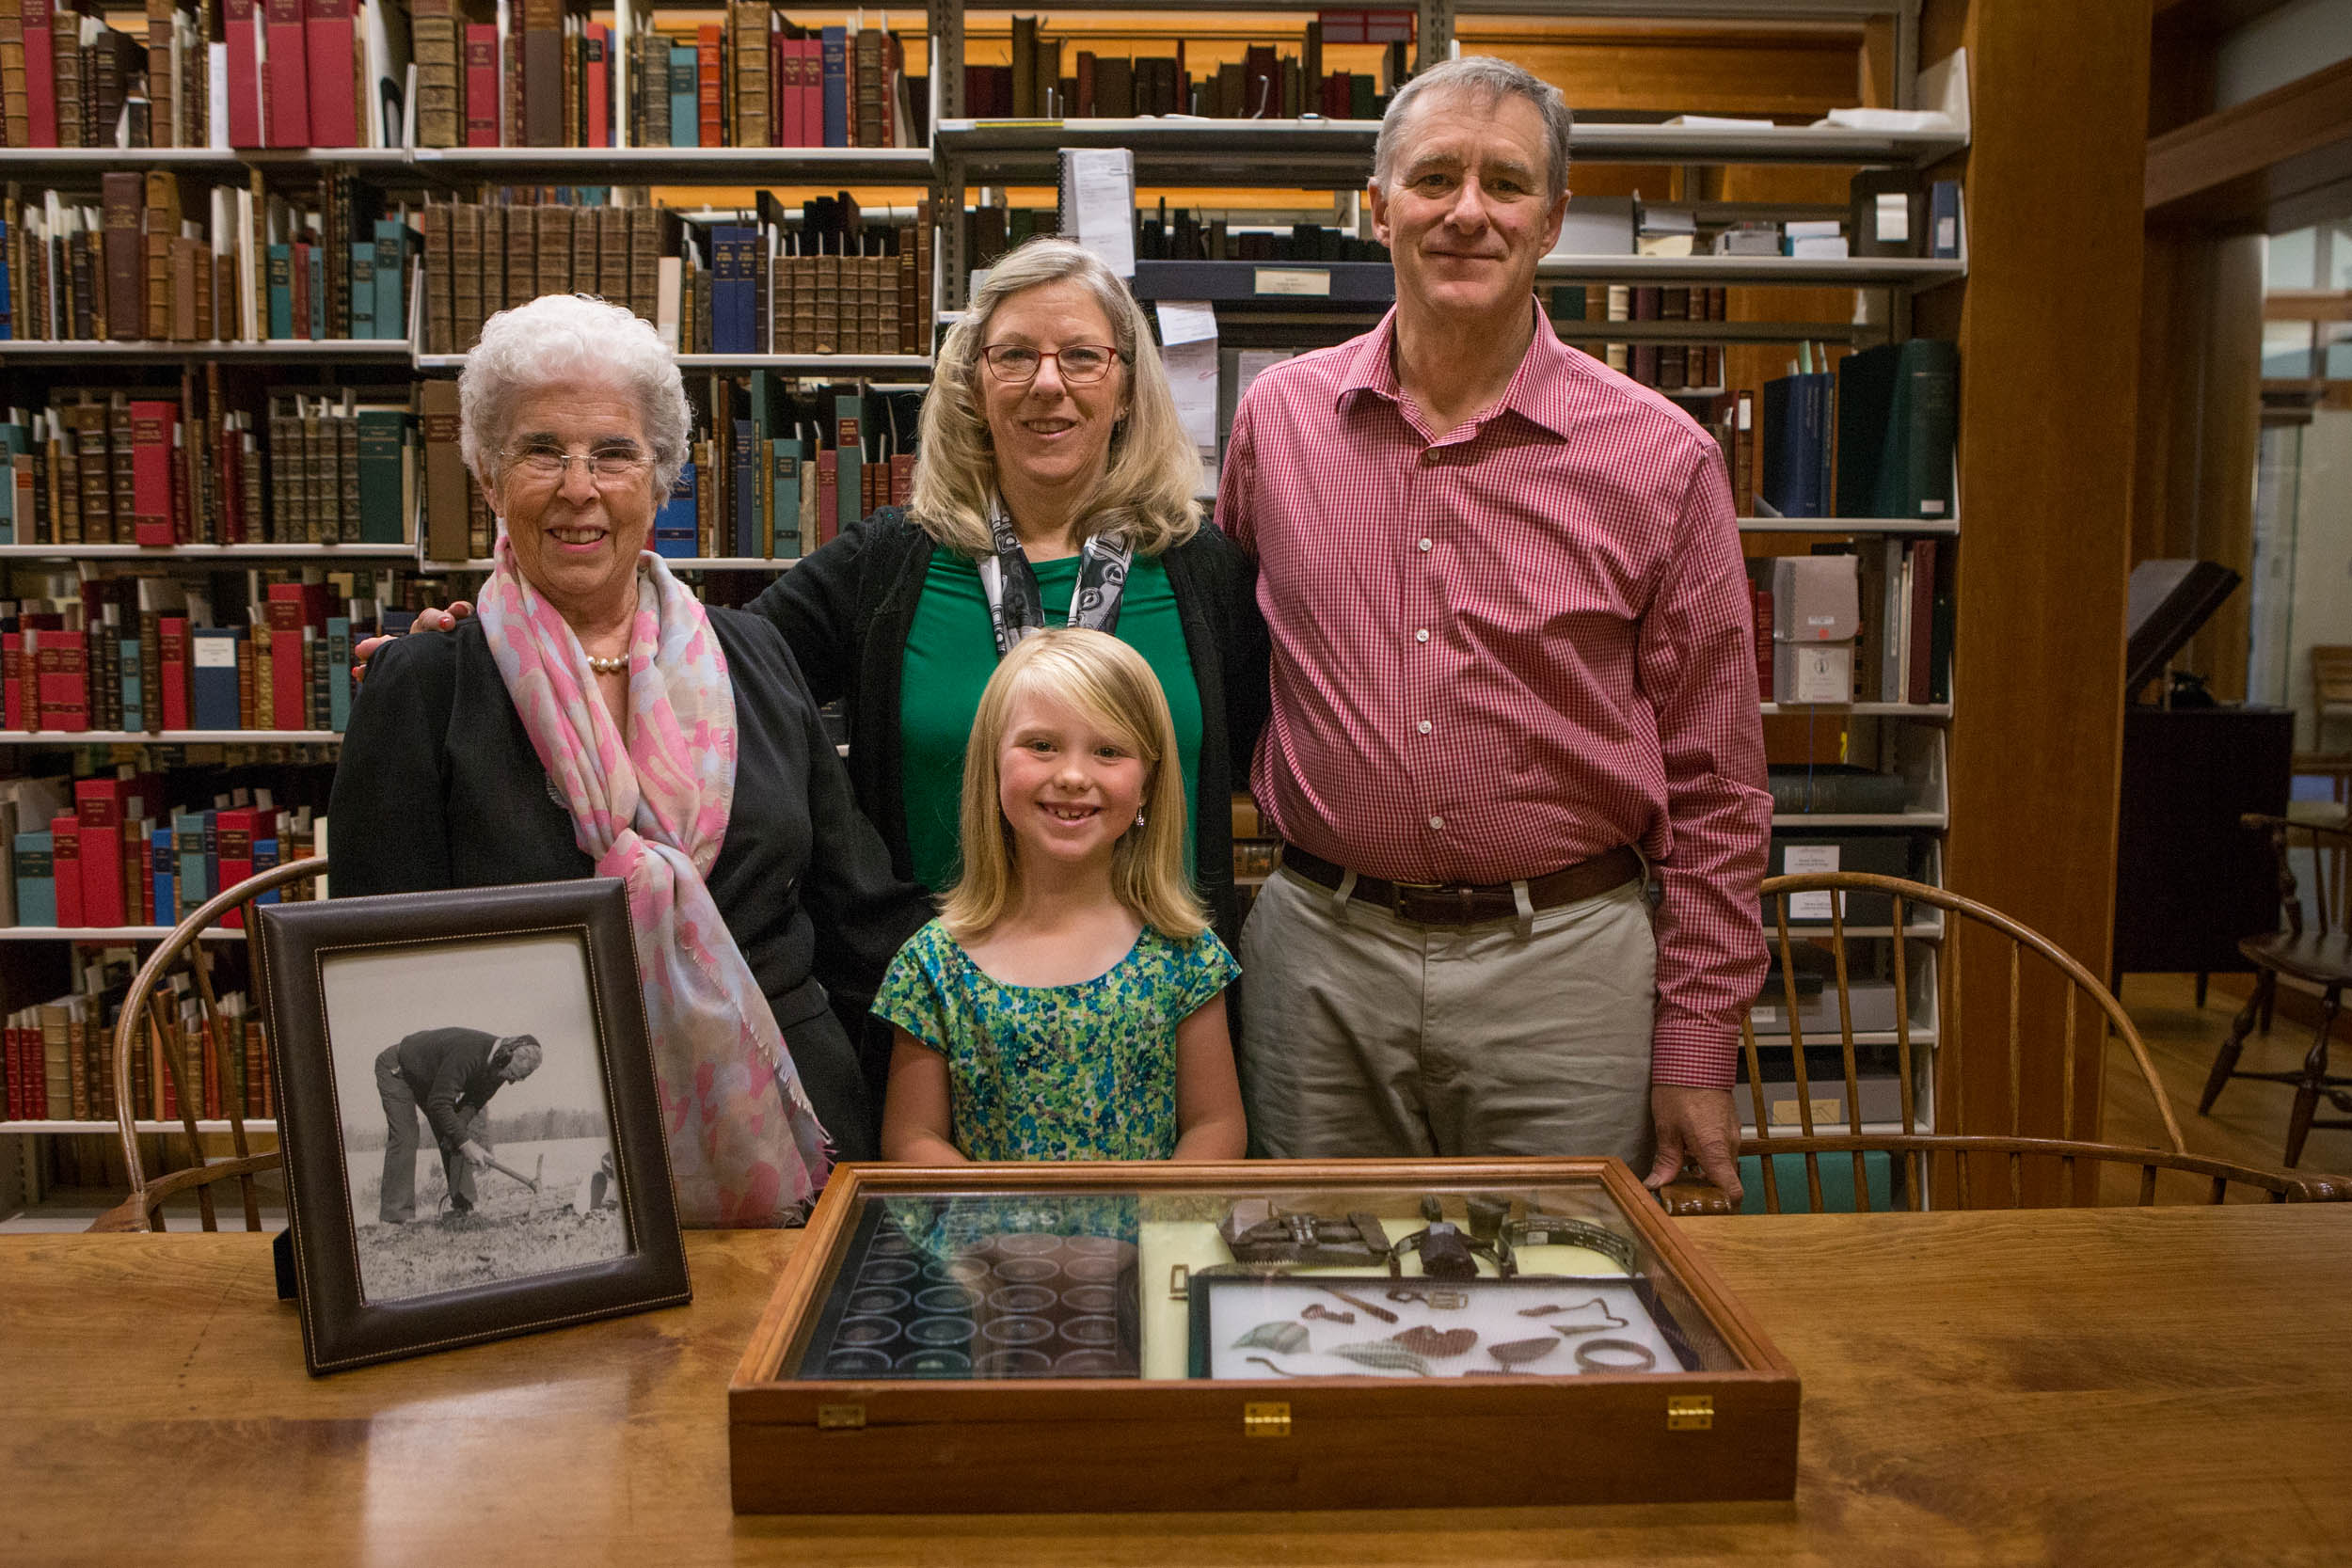 Raymond Shaw’s family displays the donation of his Civil War artifacts. From left to right: Gretta Shaw, Lori Pollard, Morgan Shaw (center), and David Shaw. (Photo by Sanjay Suchak/University Communications)